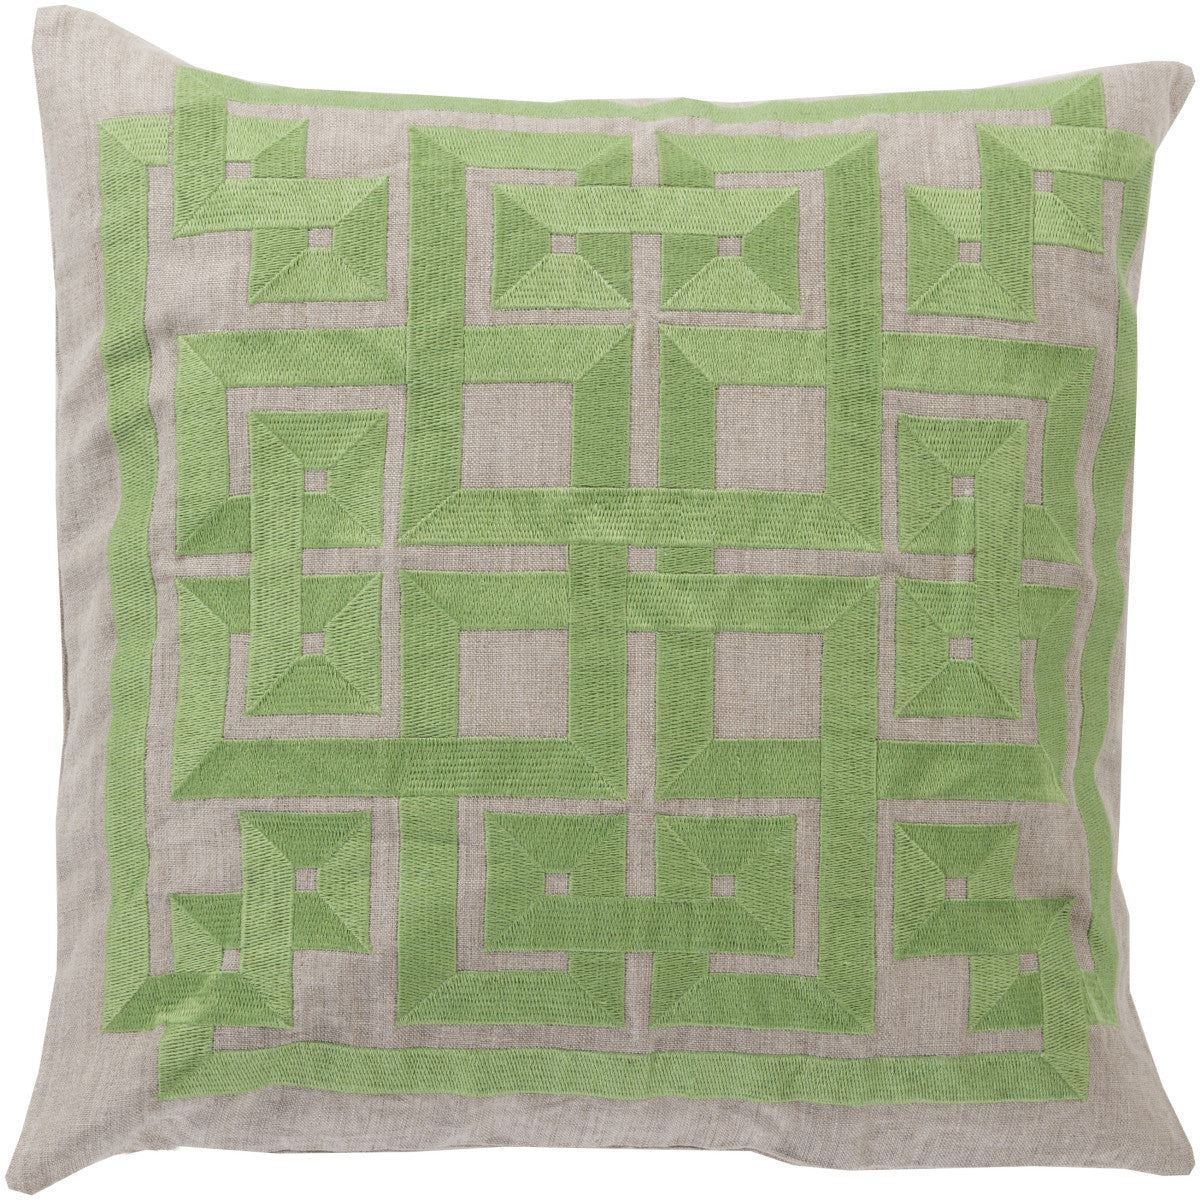 Surya Gramercy Intersected Geometrics LD-006 Pillow by Beth Lacefield